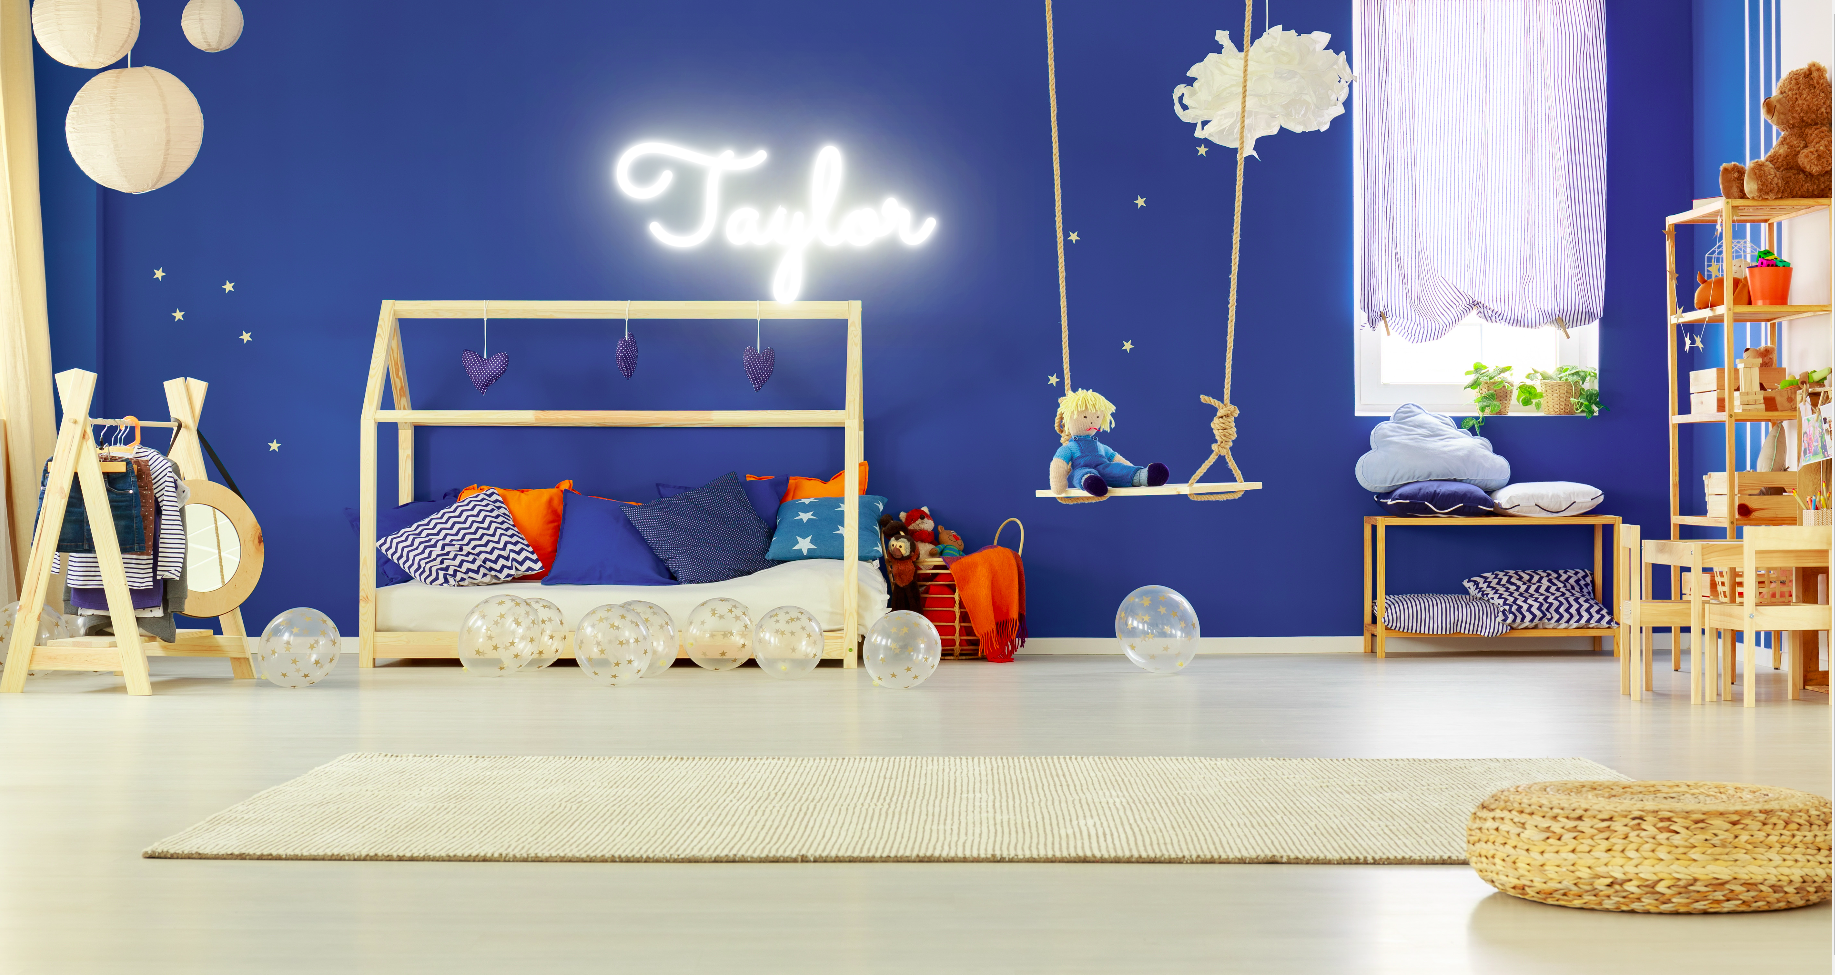 "Taylor" Baby Name LED Neon Sign